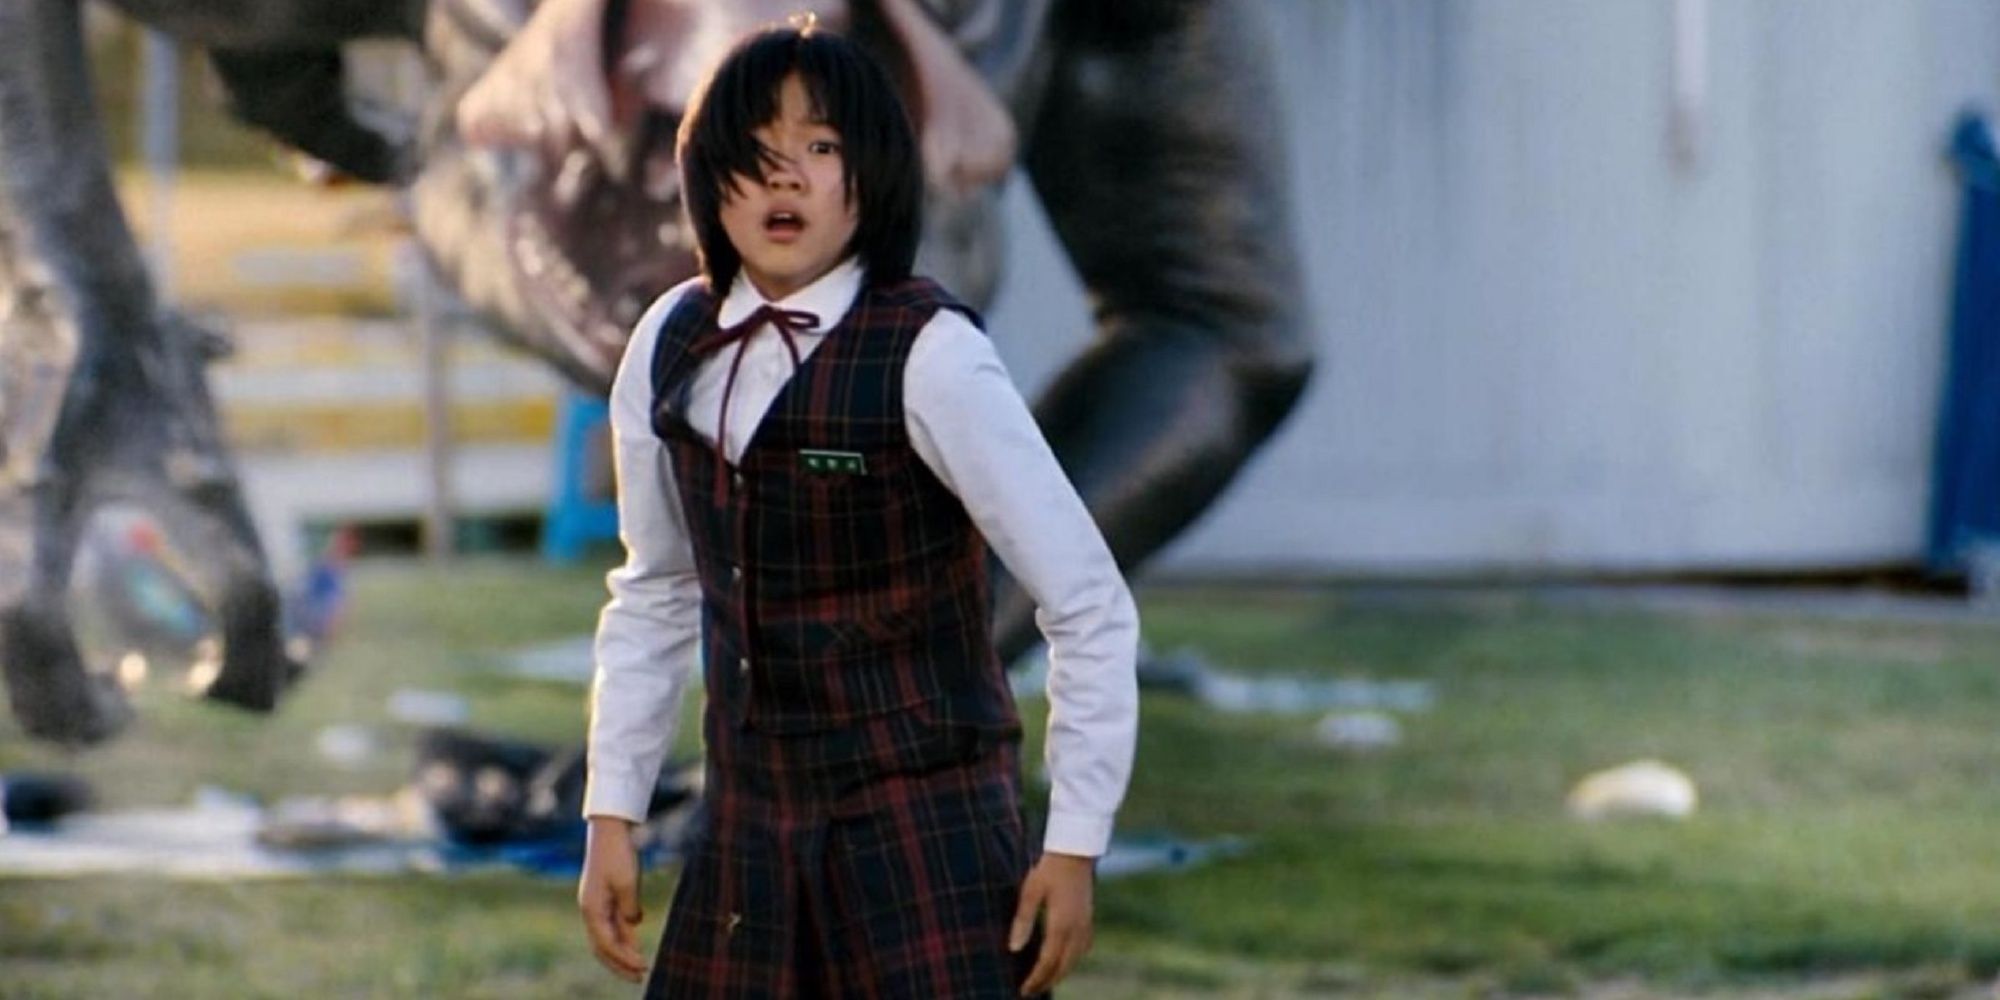 Go Ah-Sung as Park Hyun-seo standing in front of a creature in The Host (2006)